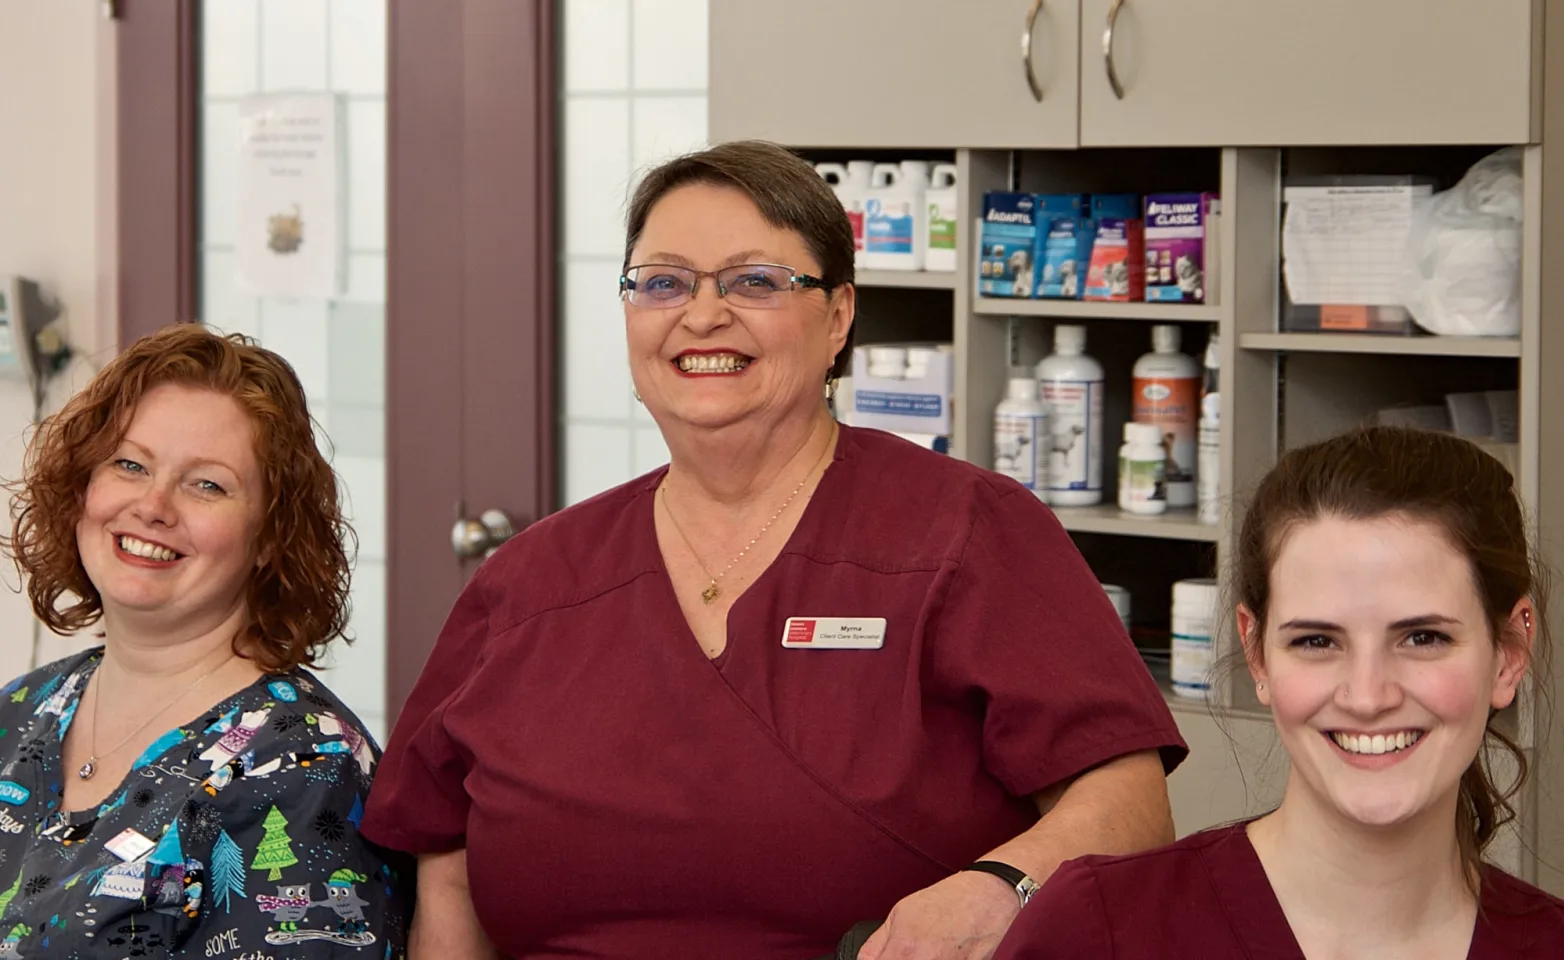 Town Centre Veterinary Hospital staff smiling